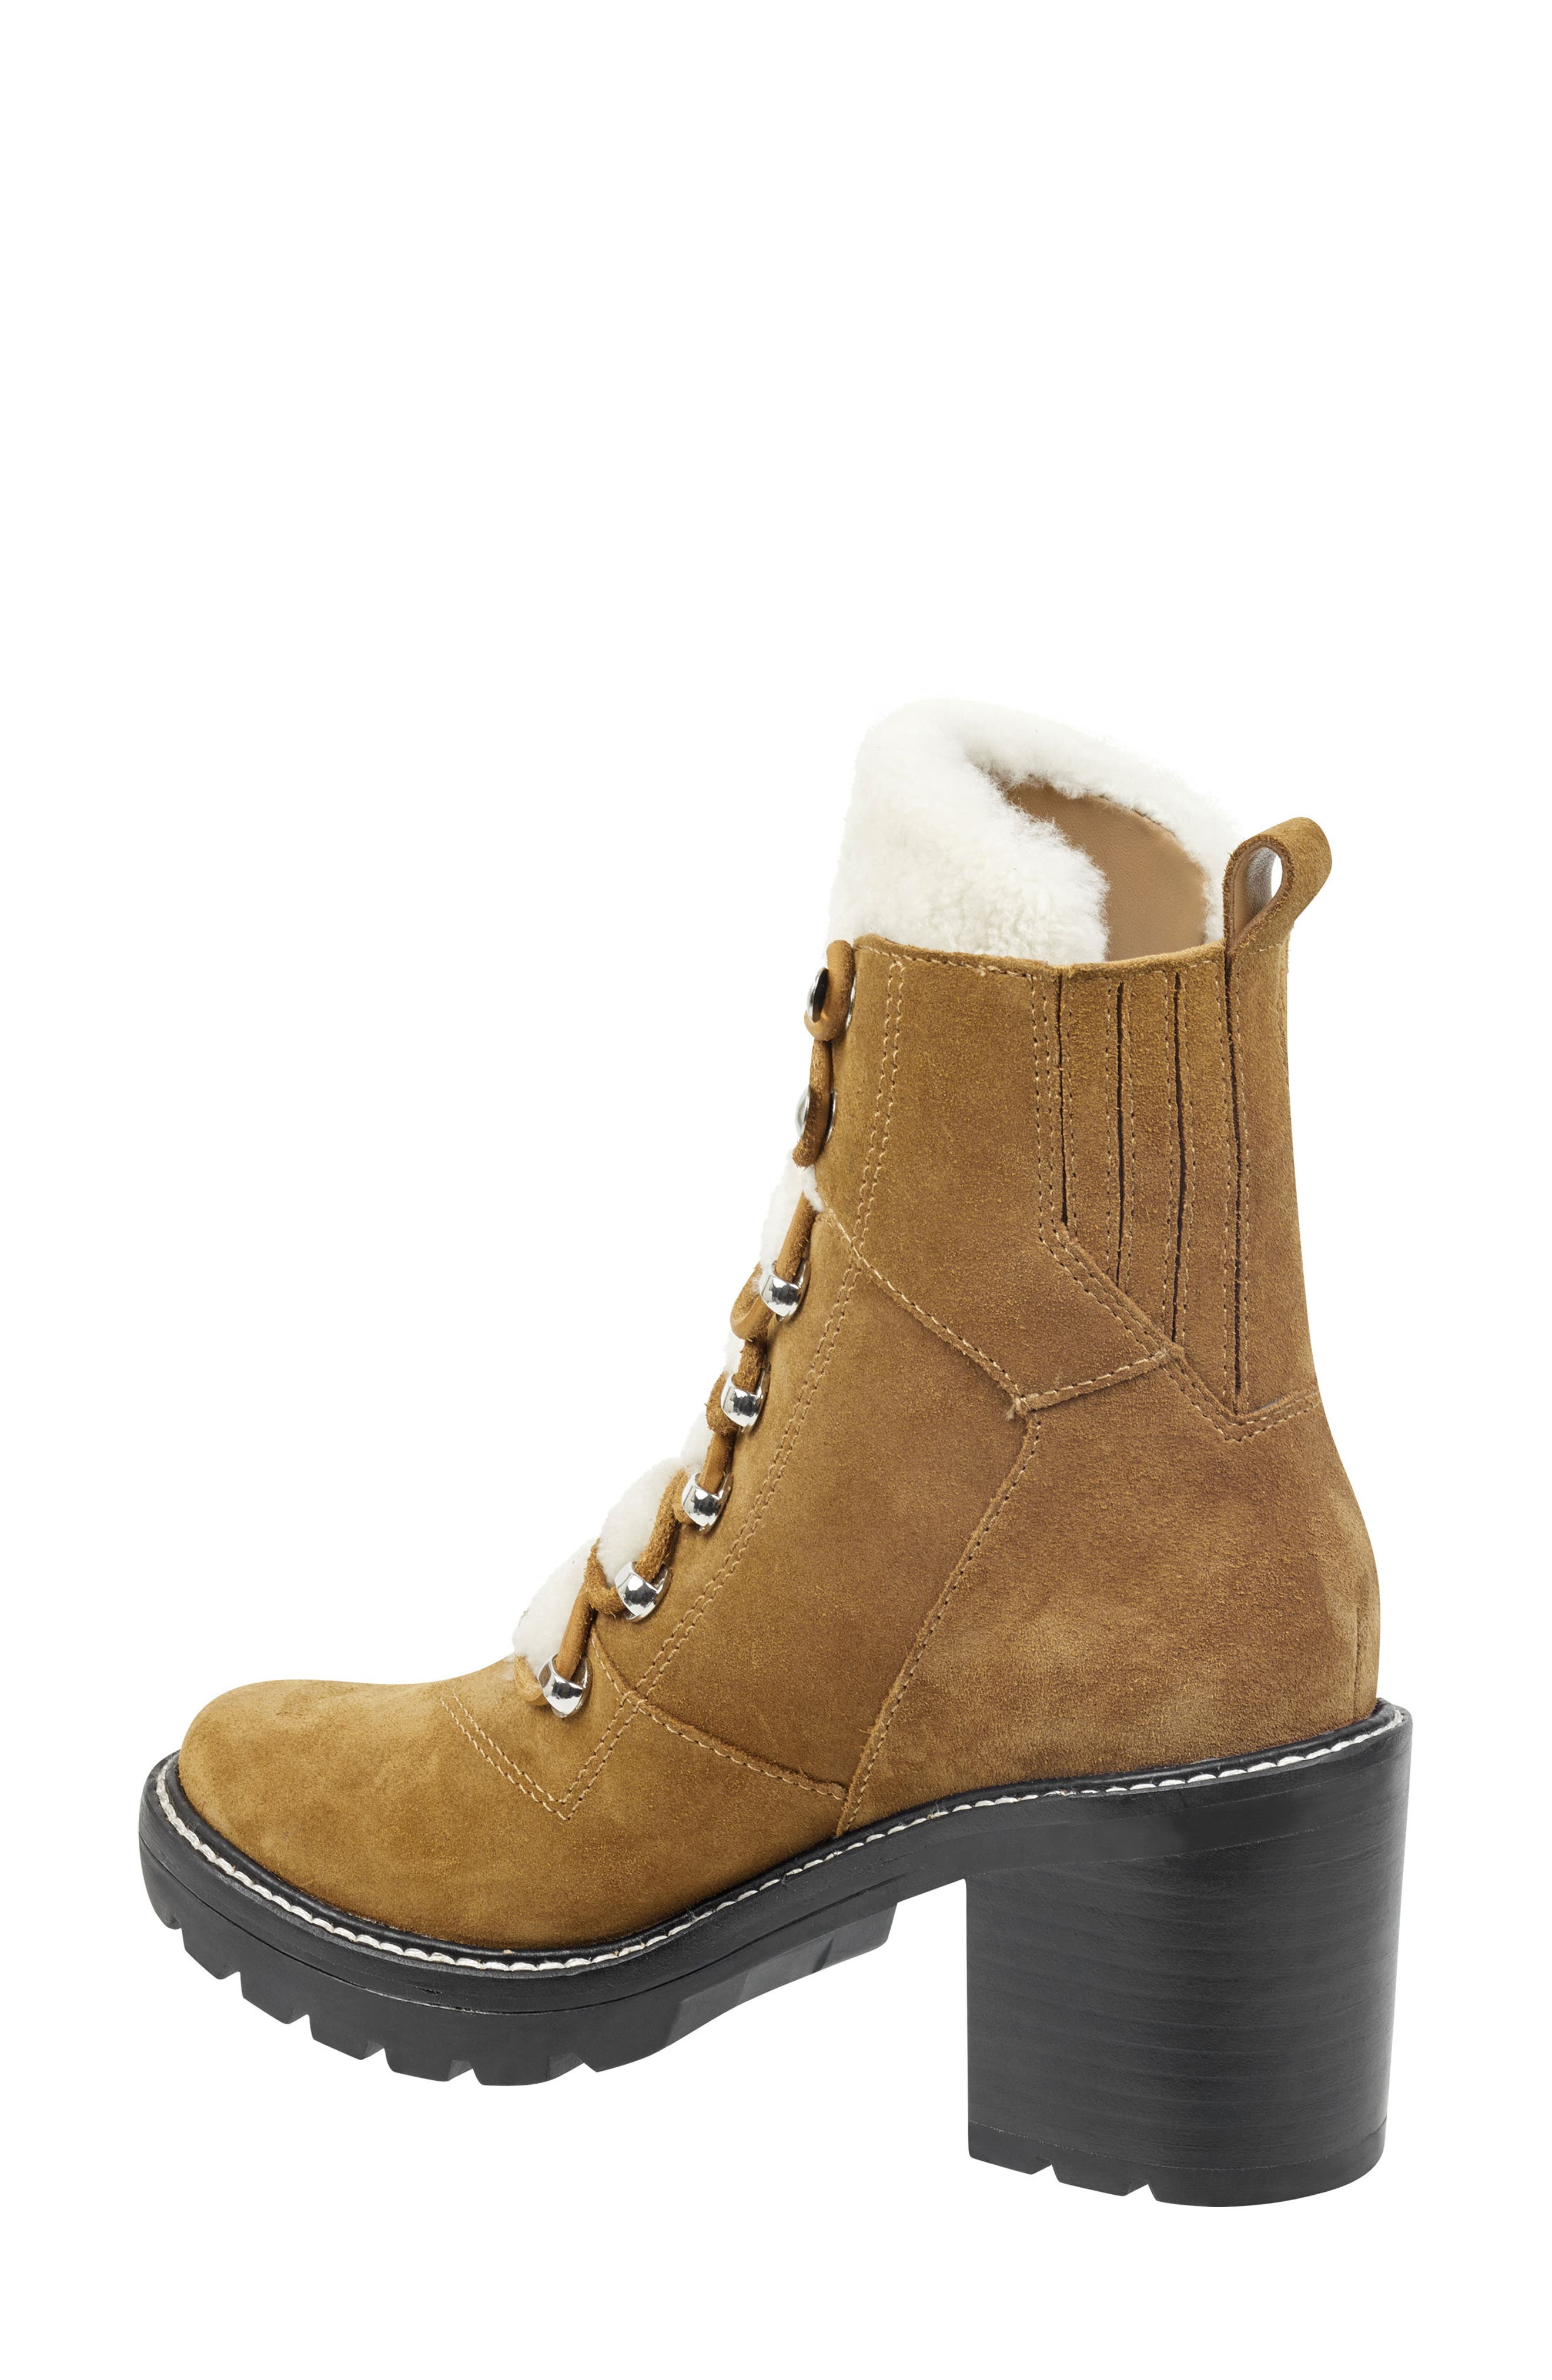 marc fisher denise lace up boot